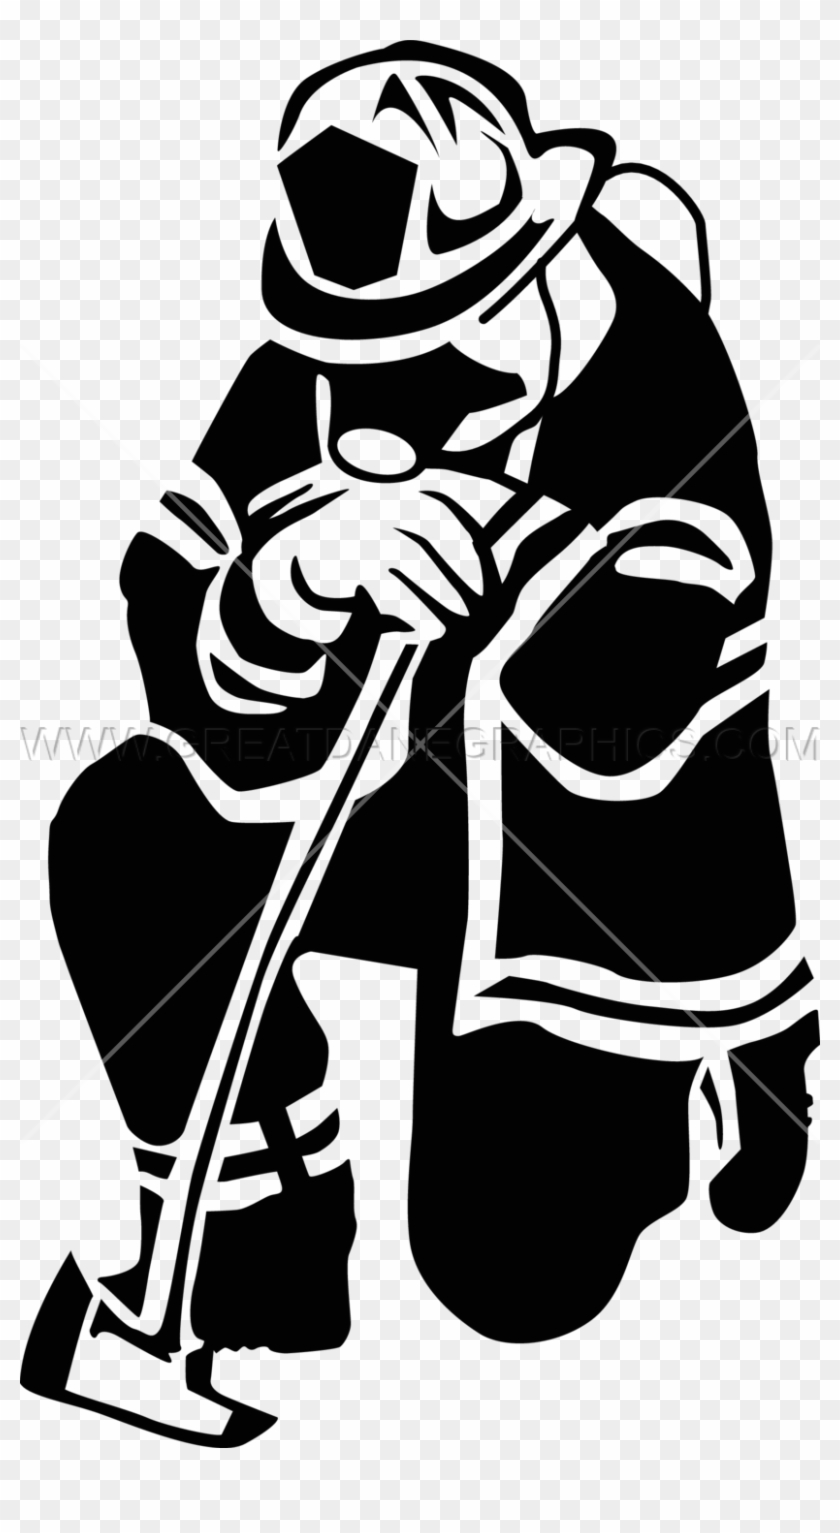 Firefighter Clipart Transparent Firefighter Black And White Png 4640190 Pikpng Download transparent fireman png for free on pngkey.com. firefighter clipart transparent